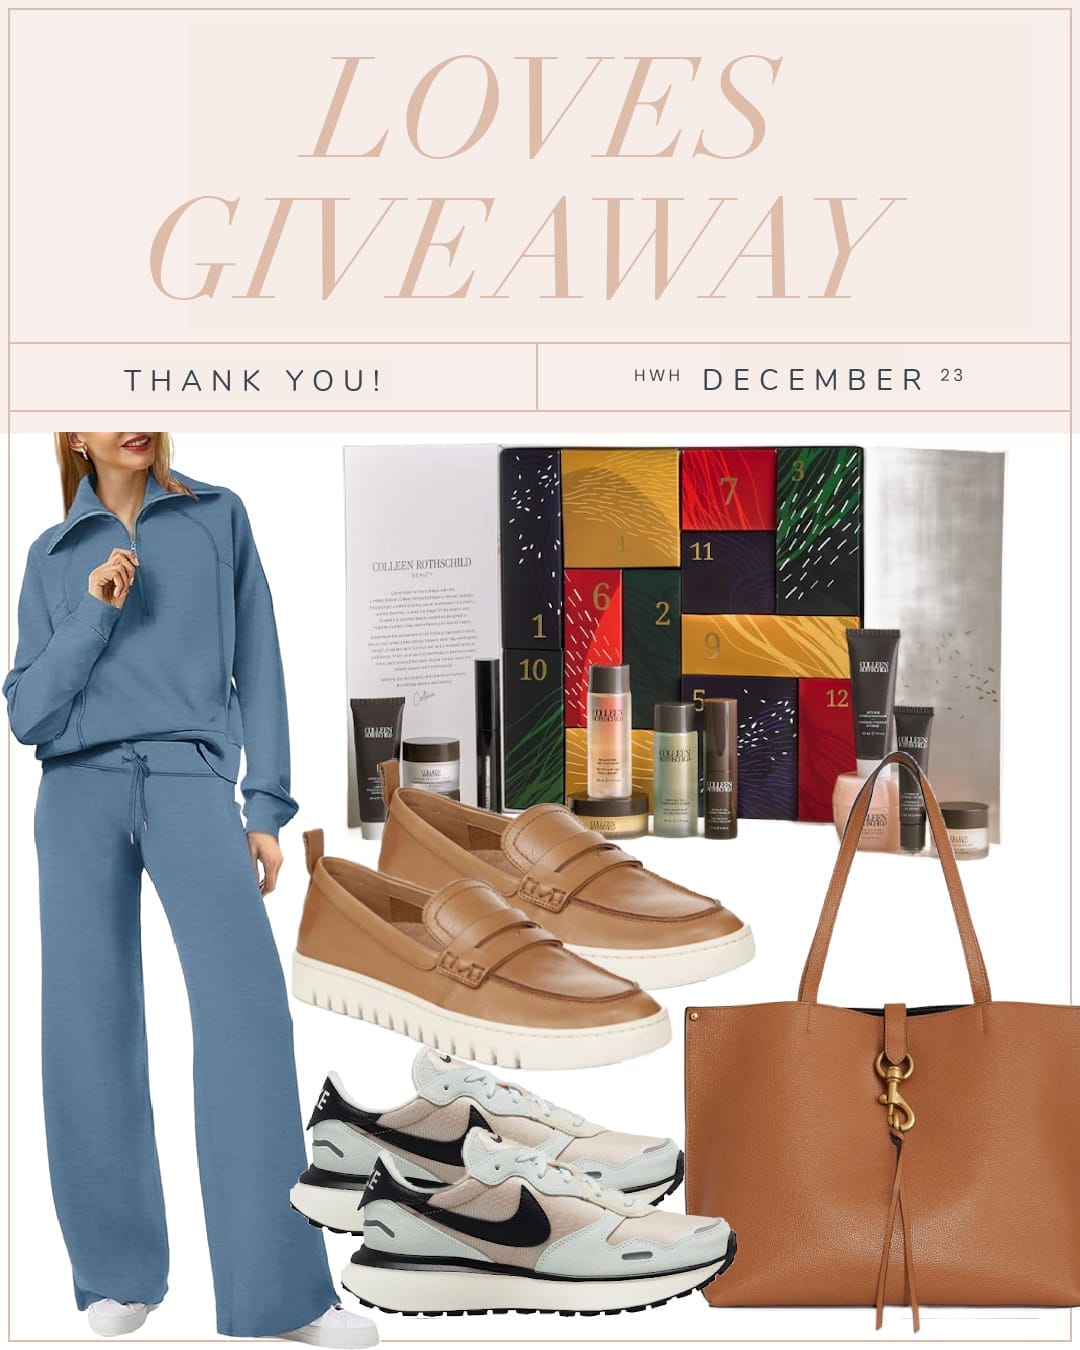 December Loves Giveaway & What I’m Enjoying This Month